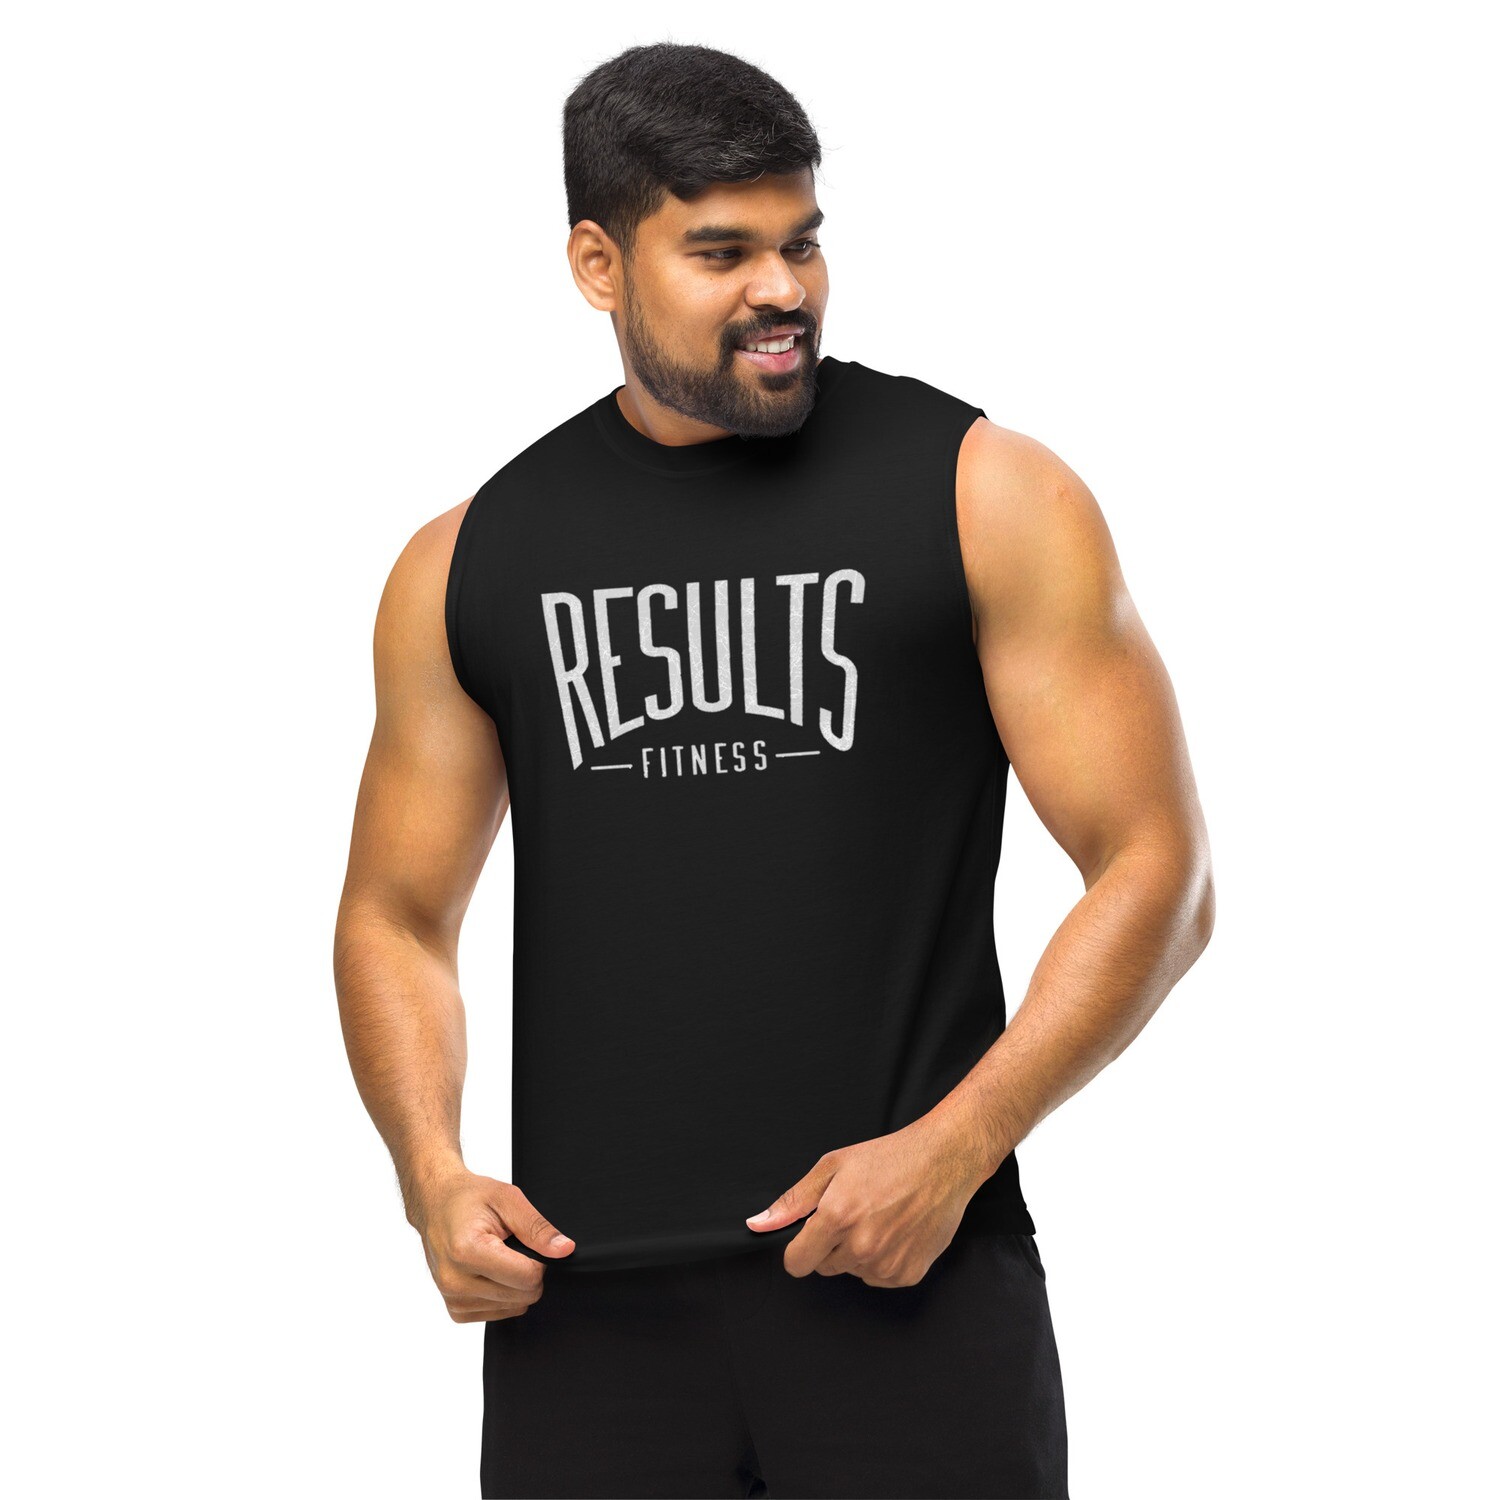 "Results Fitness" Muscle Shirt